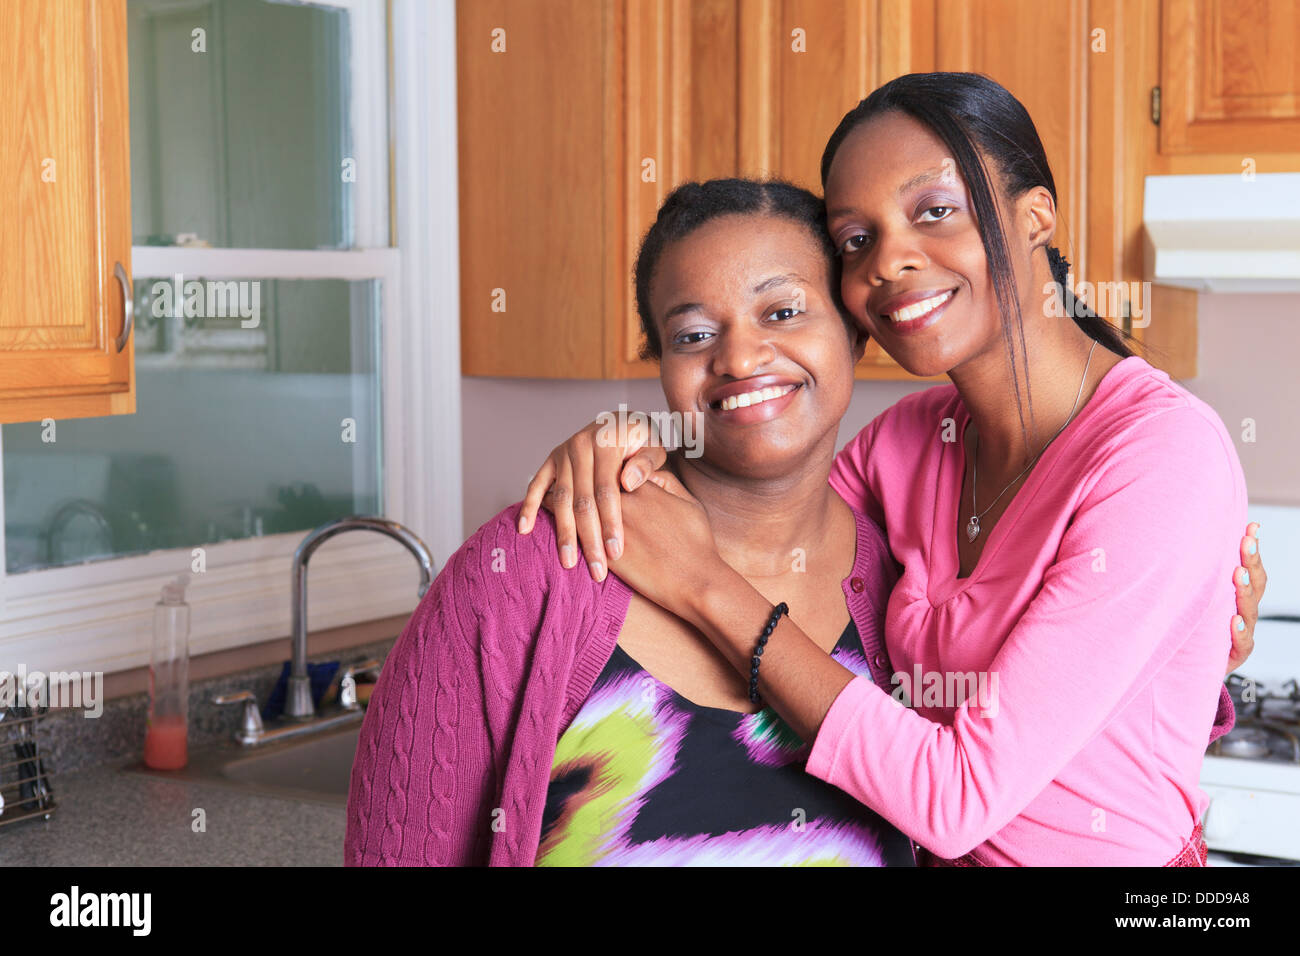 Portrait of two sisters smiling, one with learning disability Stock Photo